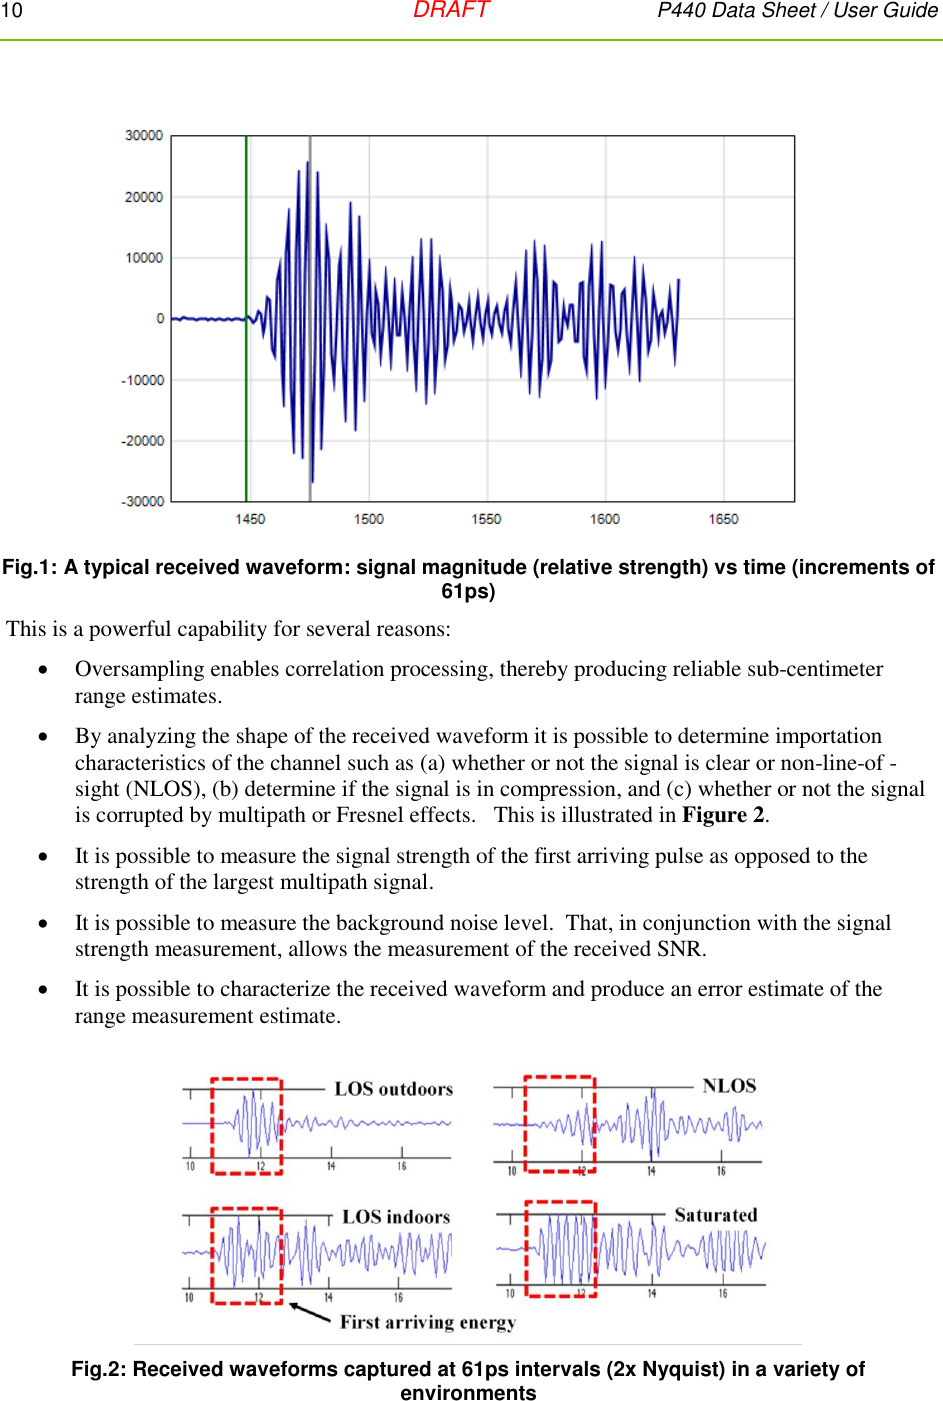 10   DRAFT P440 Data Sheet / User Guide   Fig.1: A typical received waveform: signal magnitude (relative strength) vs time (increments of 61ps)  This is a powerful capability for several reasons:  Oversampling enables correlation processing, thereby producing reliable sub-centimeter range estimates.  By analyzing the shape of the received waveform it is possible to determine importation characteristics of the channel such as (a) whether or not the signal is clear or non-line-of -sight (NLOS), (b) determine if the signal is in compression, and (c) whether or not the signal is corrupted by multipath or Fresnel effects.   This is illustrated in Figure 2.  It is possible to measure the signal strength of the first arriving pulse as opposed to the strength of the largest multipath signal.  It is possible to measure the background noise level.  That, in conjunction with the signal strength measurement, allows the measurement of the received SNR.  It is possible to characterize the received waveform and produce an error estimate of the range measurement estimate.   Fig.2: Received waveforms captured at 61ps intervals (2x Nyquist) in a variety of environments 